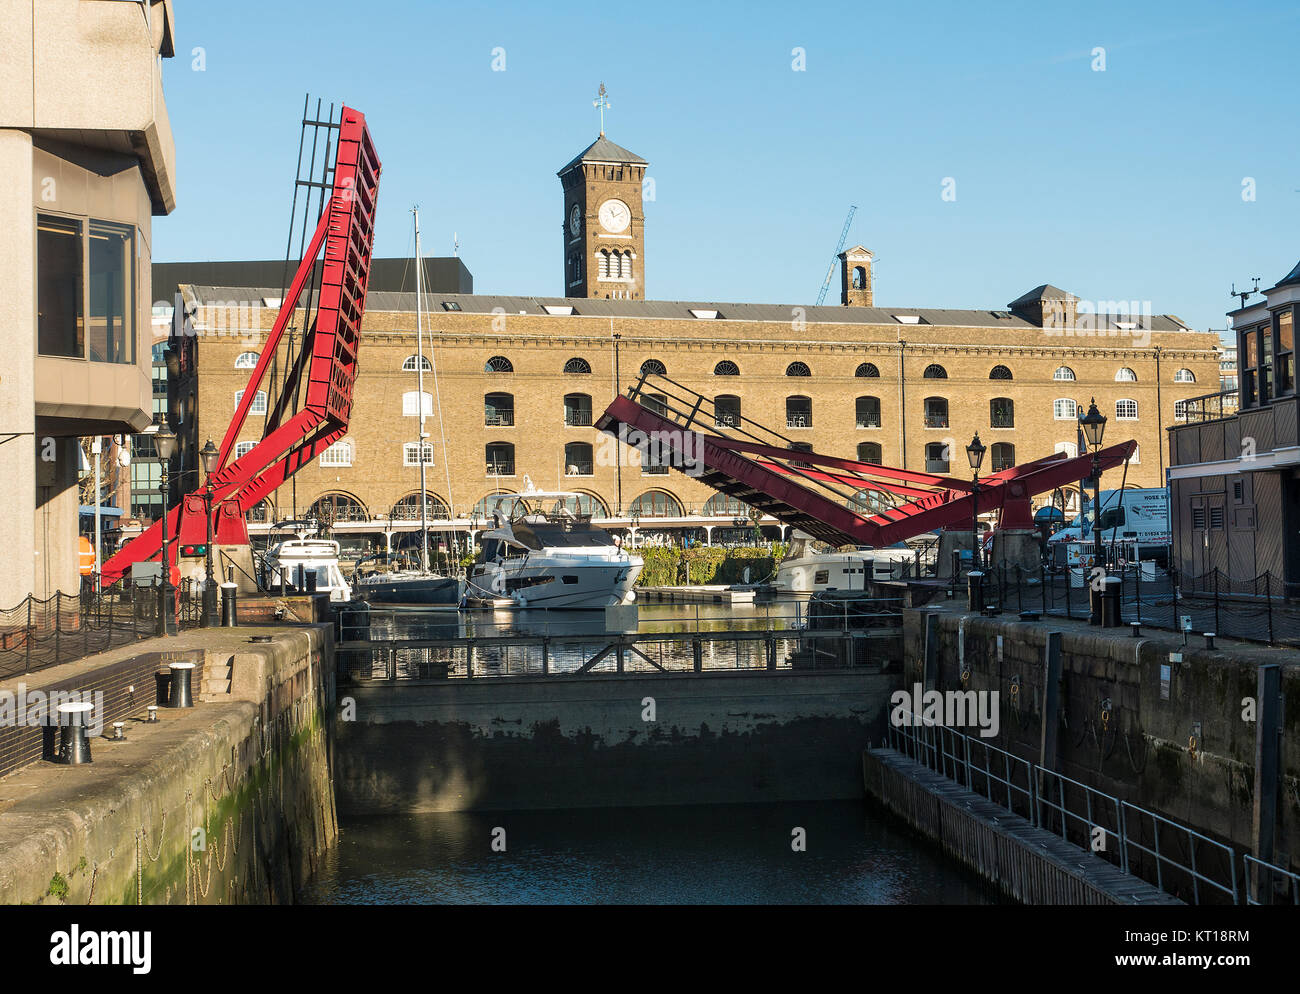 The Entrance from the River Thames into St Katharine Dock with Raised Red Access Bridge over Lock Tower Hamlets London England United Kingdom UK Stock Photo